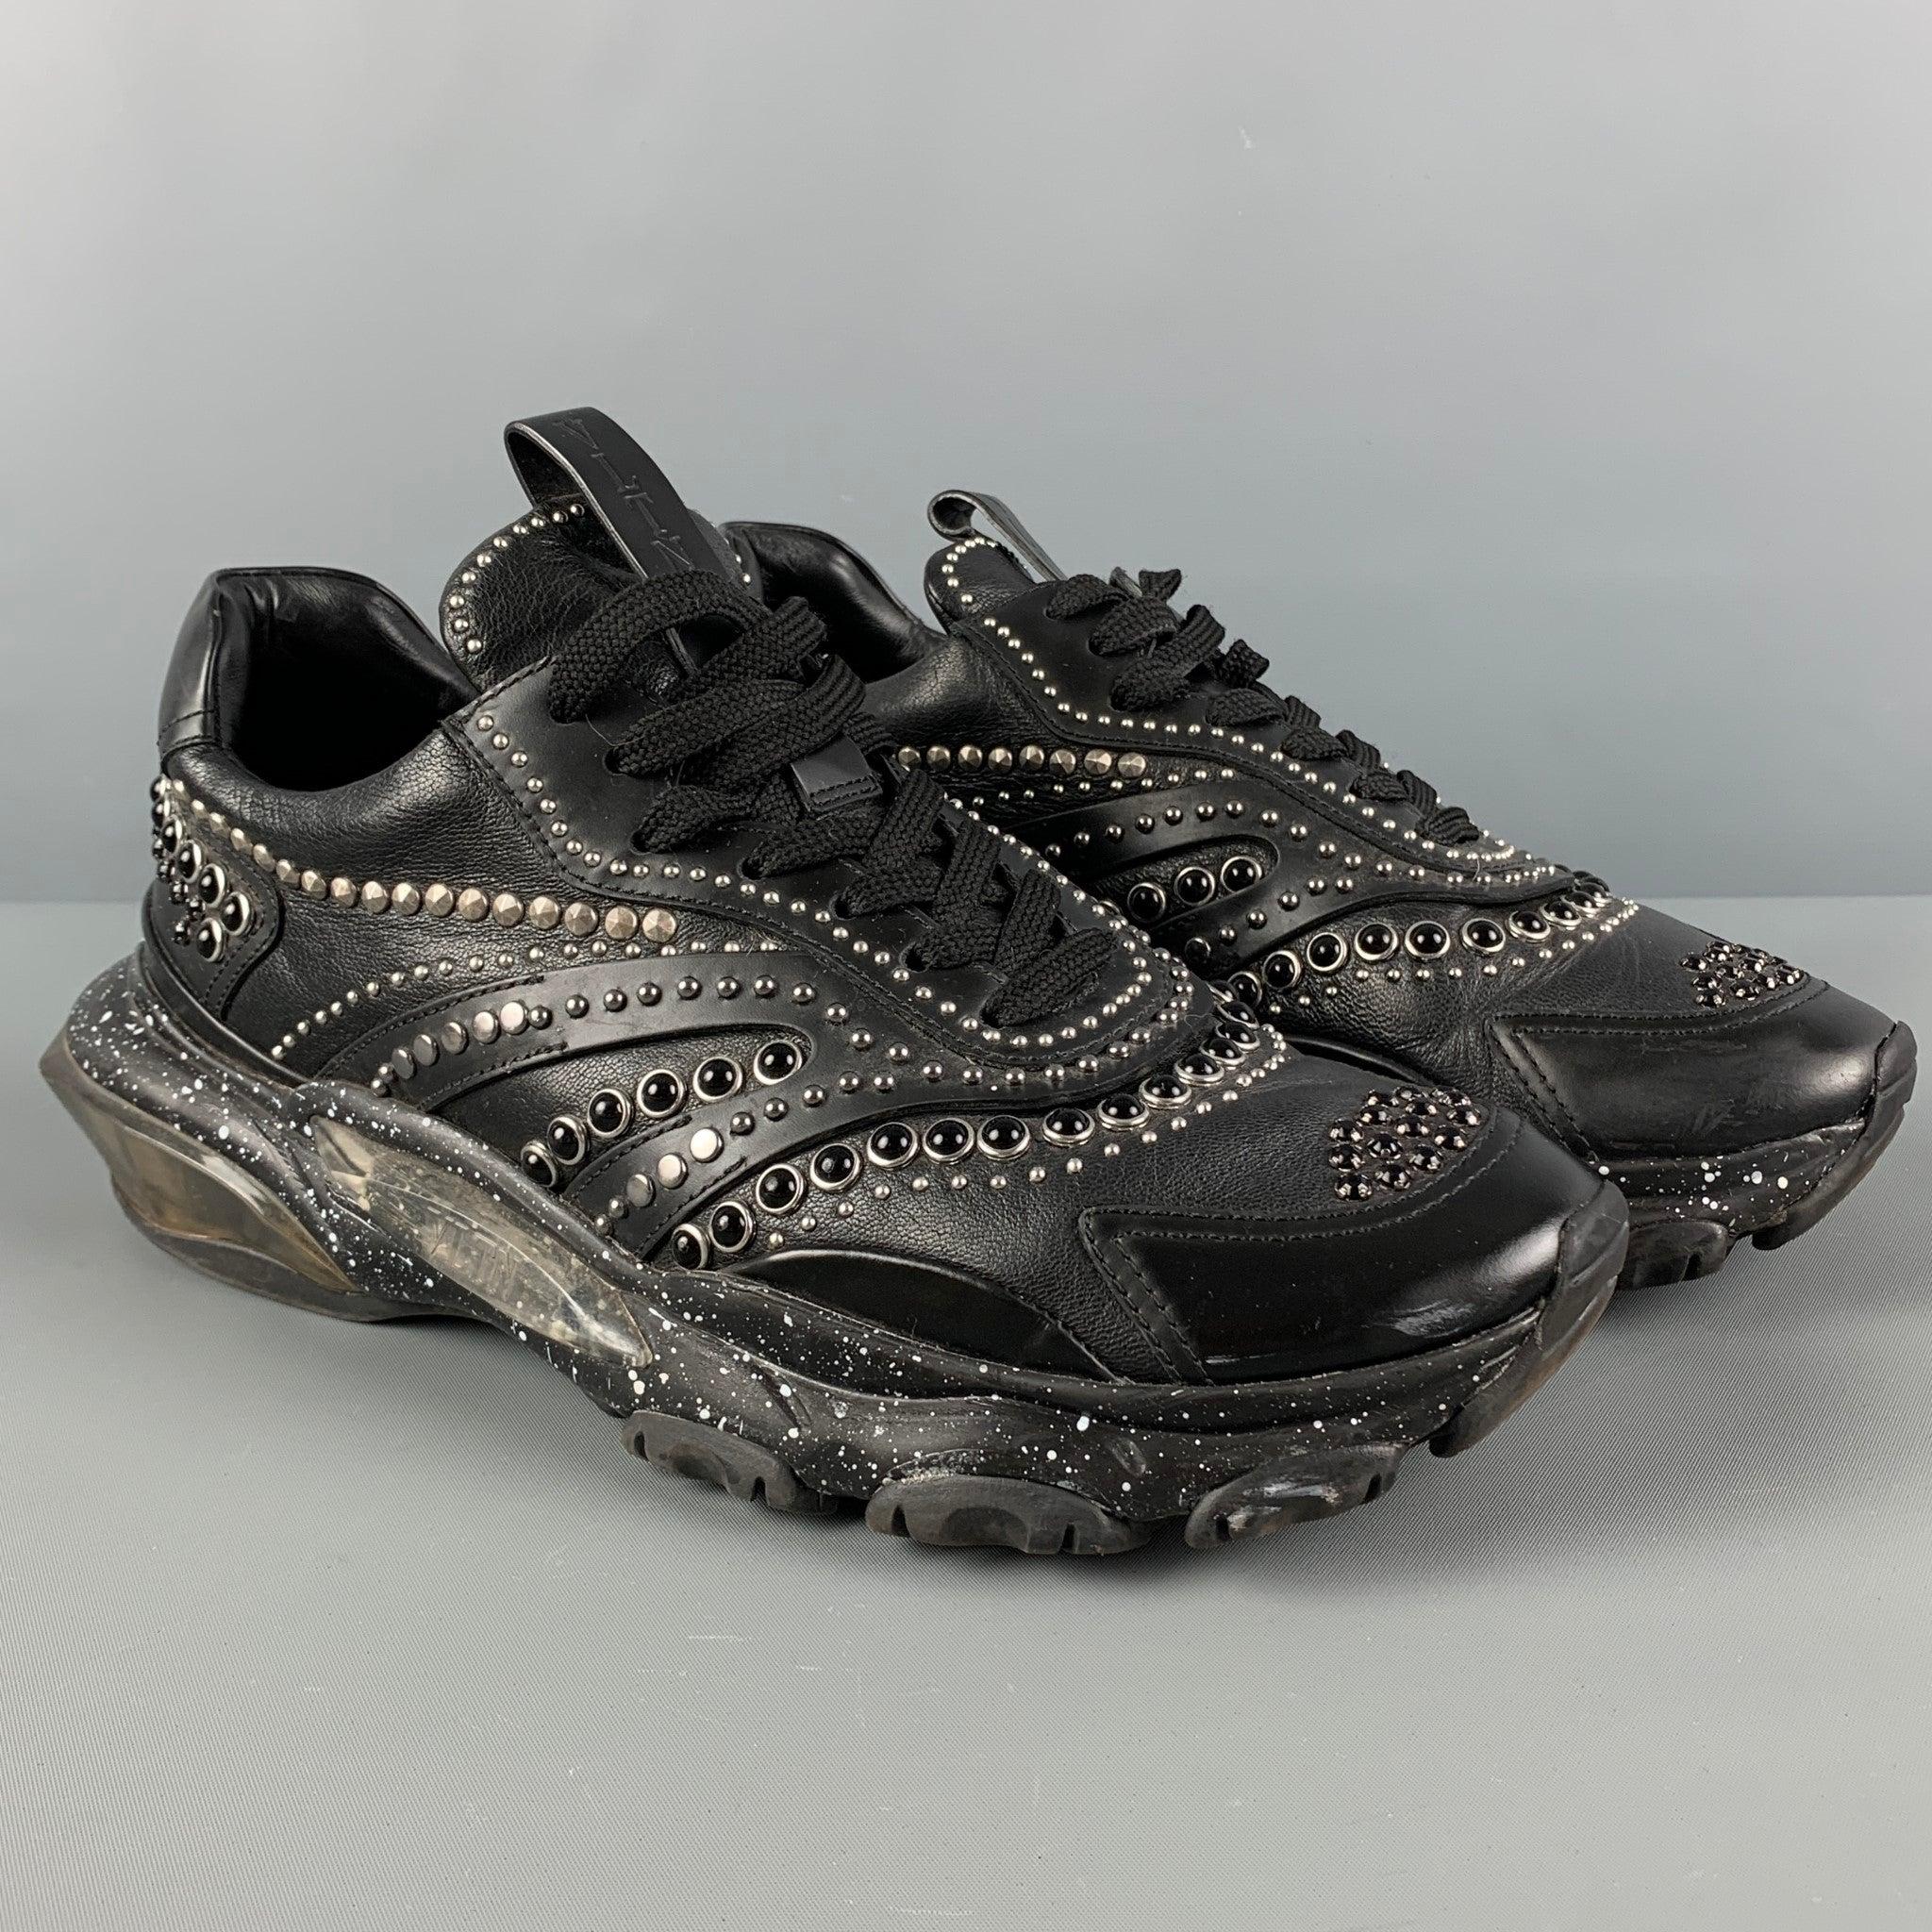 VALENTINO sneakers comes in a black leather featuring a studded design throughout, low-top, chunky sole, and a lace up closure. Made in Italy. Very Good
Pre-Owned Condition. 

Marked:  
LSQB05Y2 41Outsole: 12 inches  x 4.5 inches 
  
  
 
Reference: